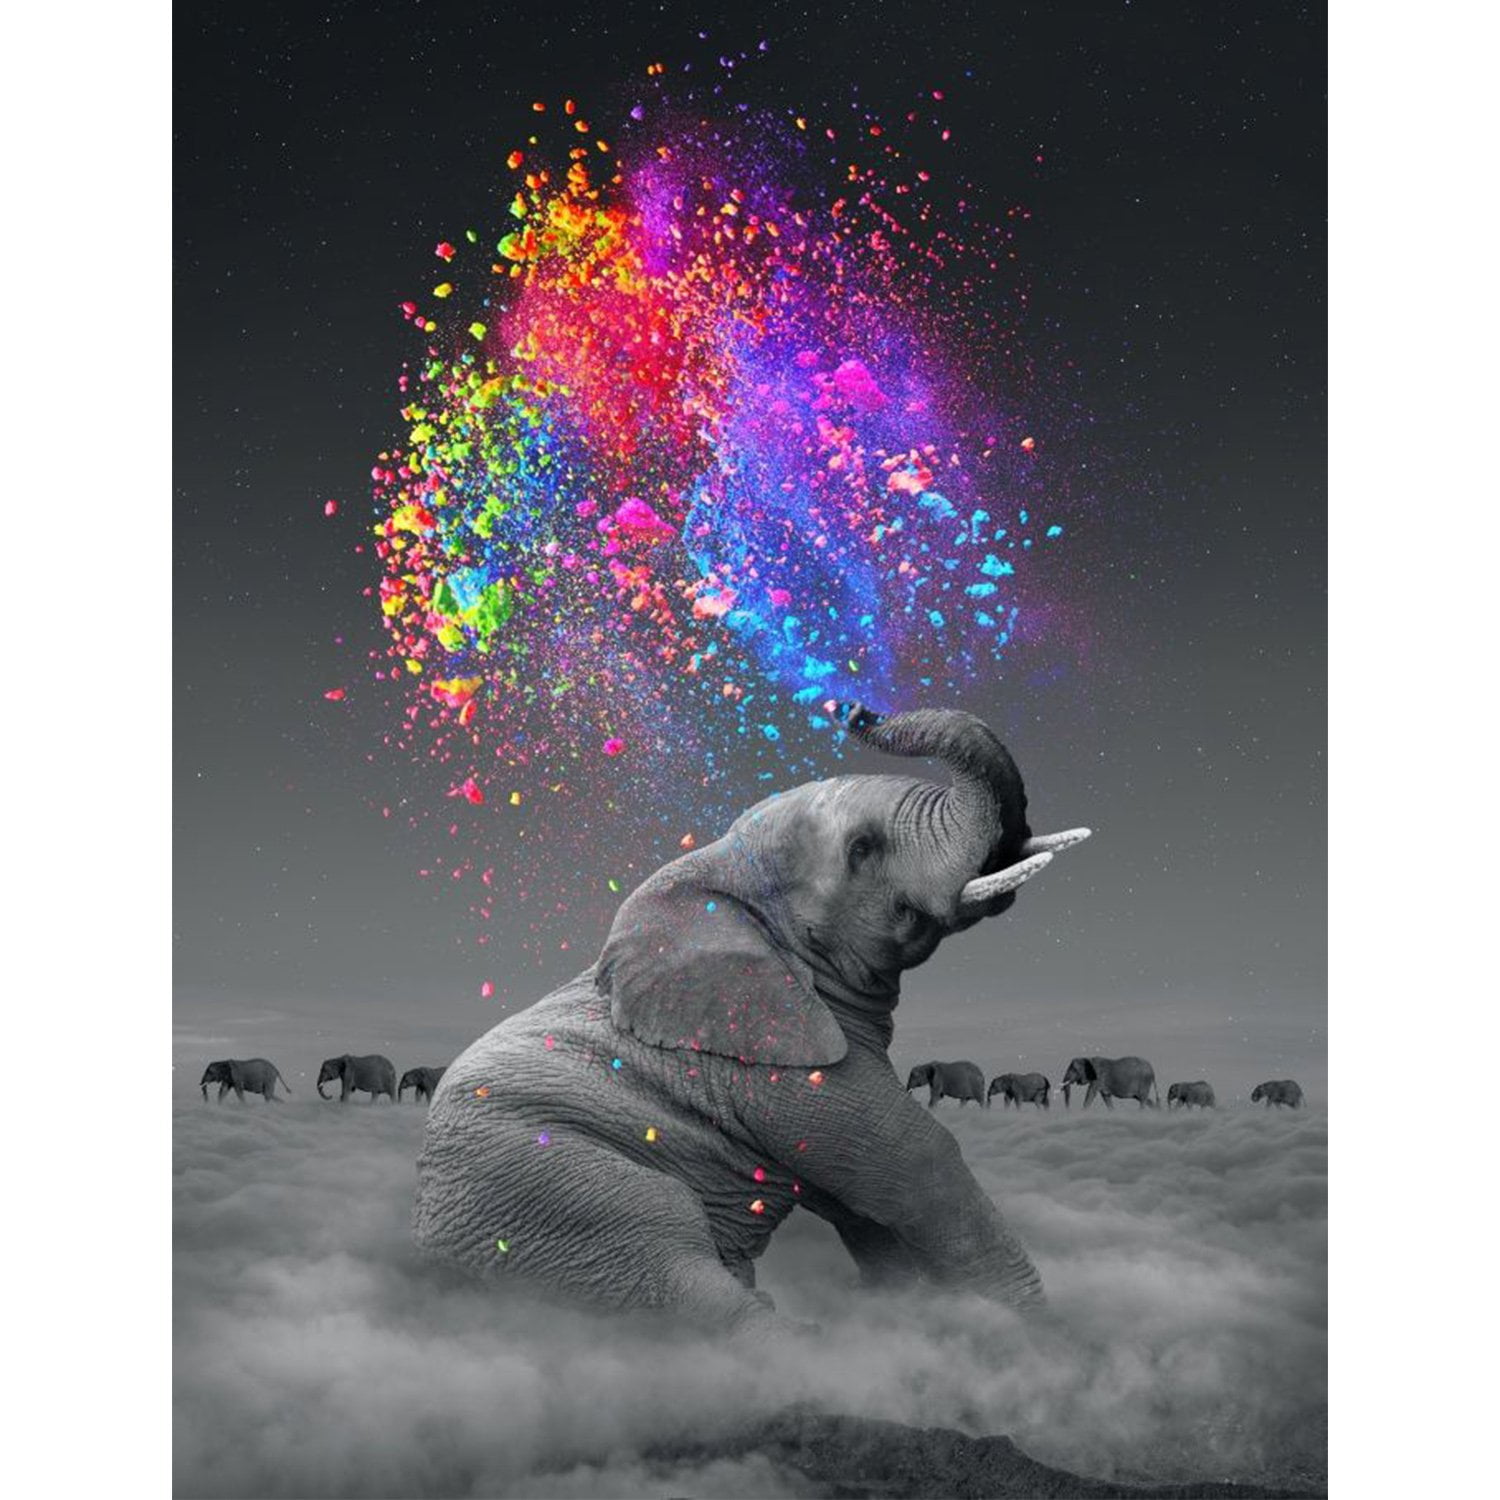 5D Diamond Painting Elephant Mother and Child Lovely Diamond Painting Full Drill Diamond Art Kit for Adults and Kids 12X16 inch DIY Art Craft for Home Wall Decor Diamond Art with Accessories Tools 